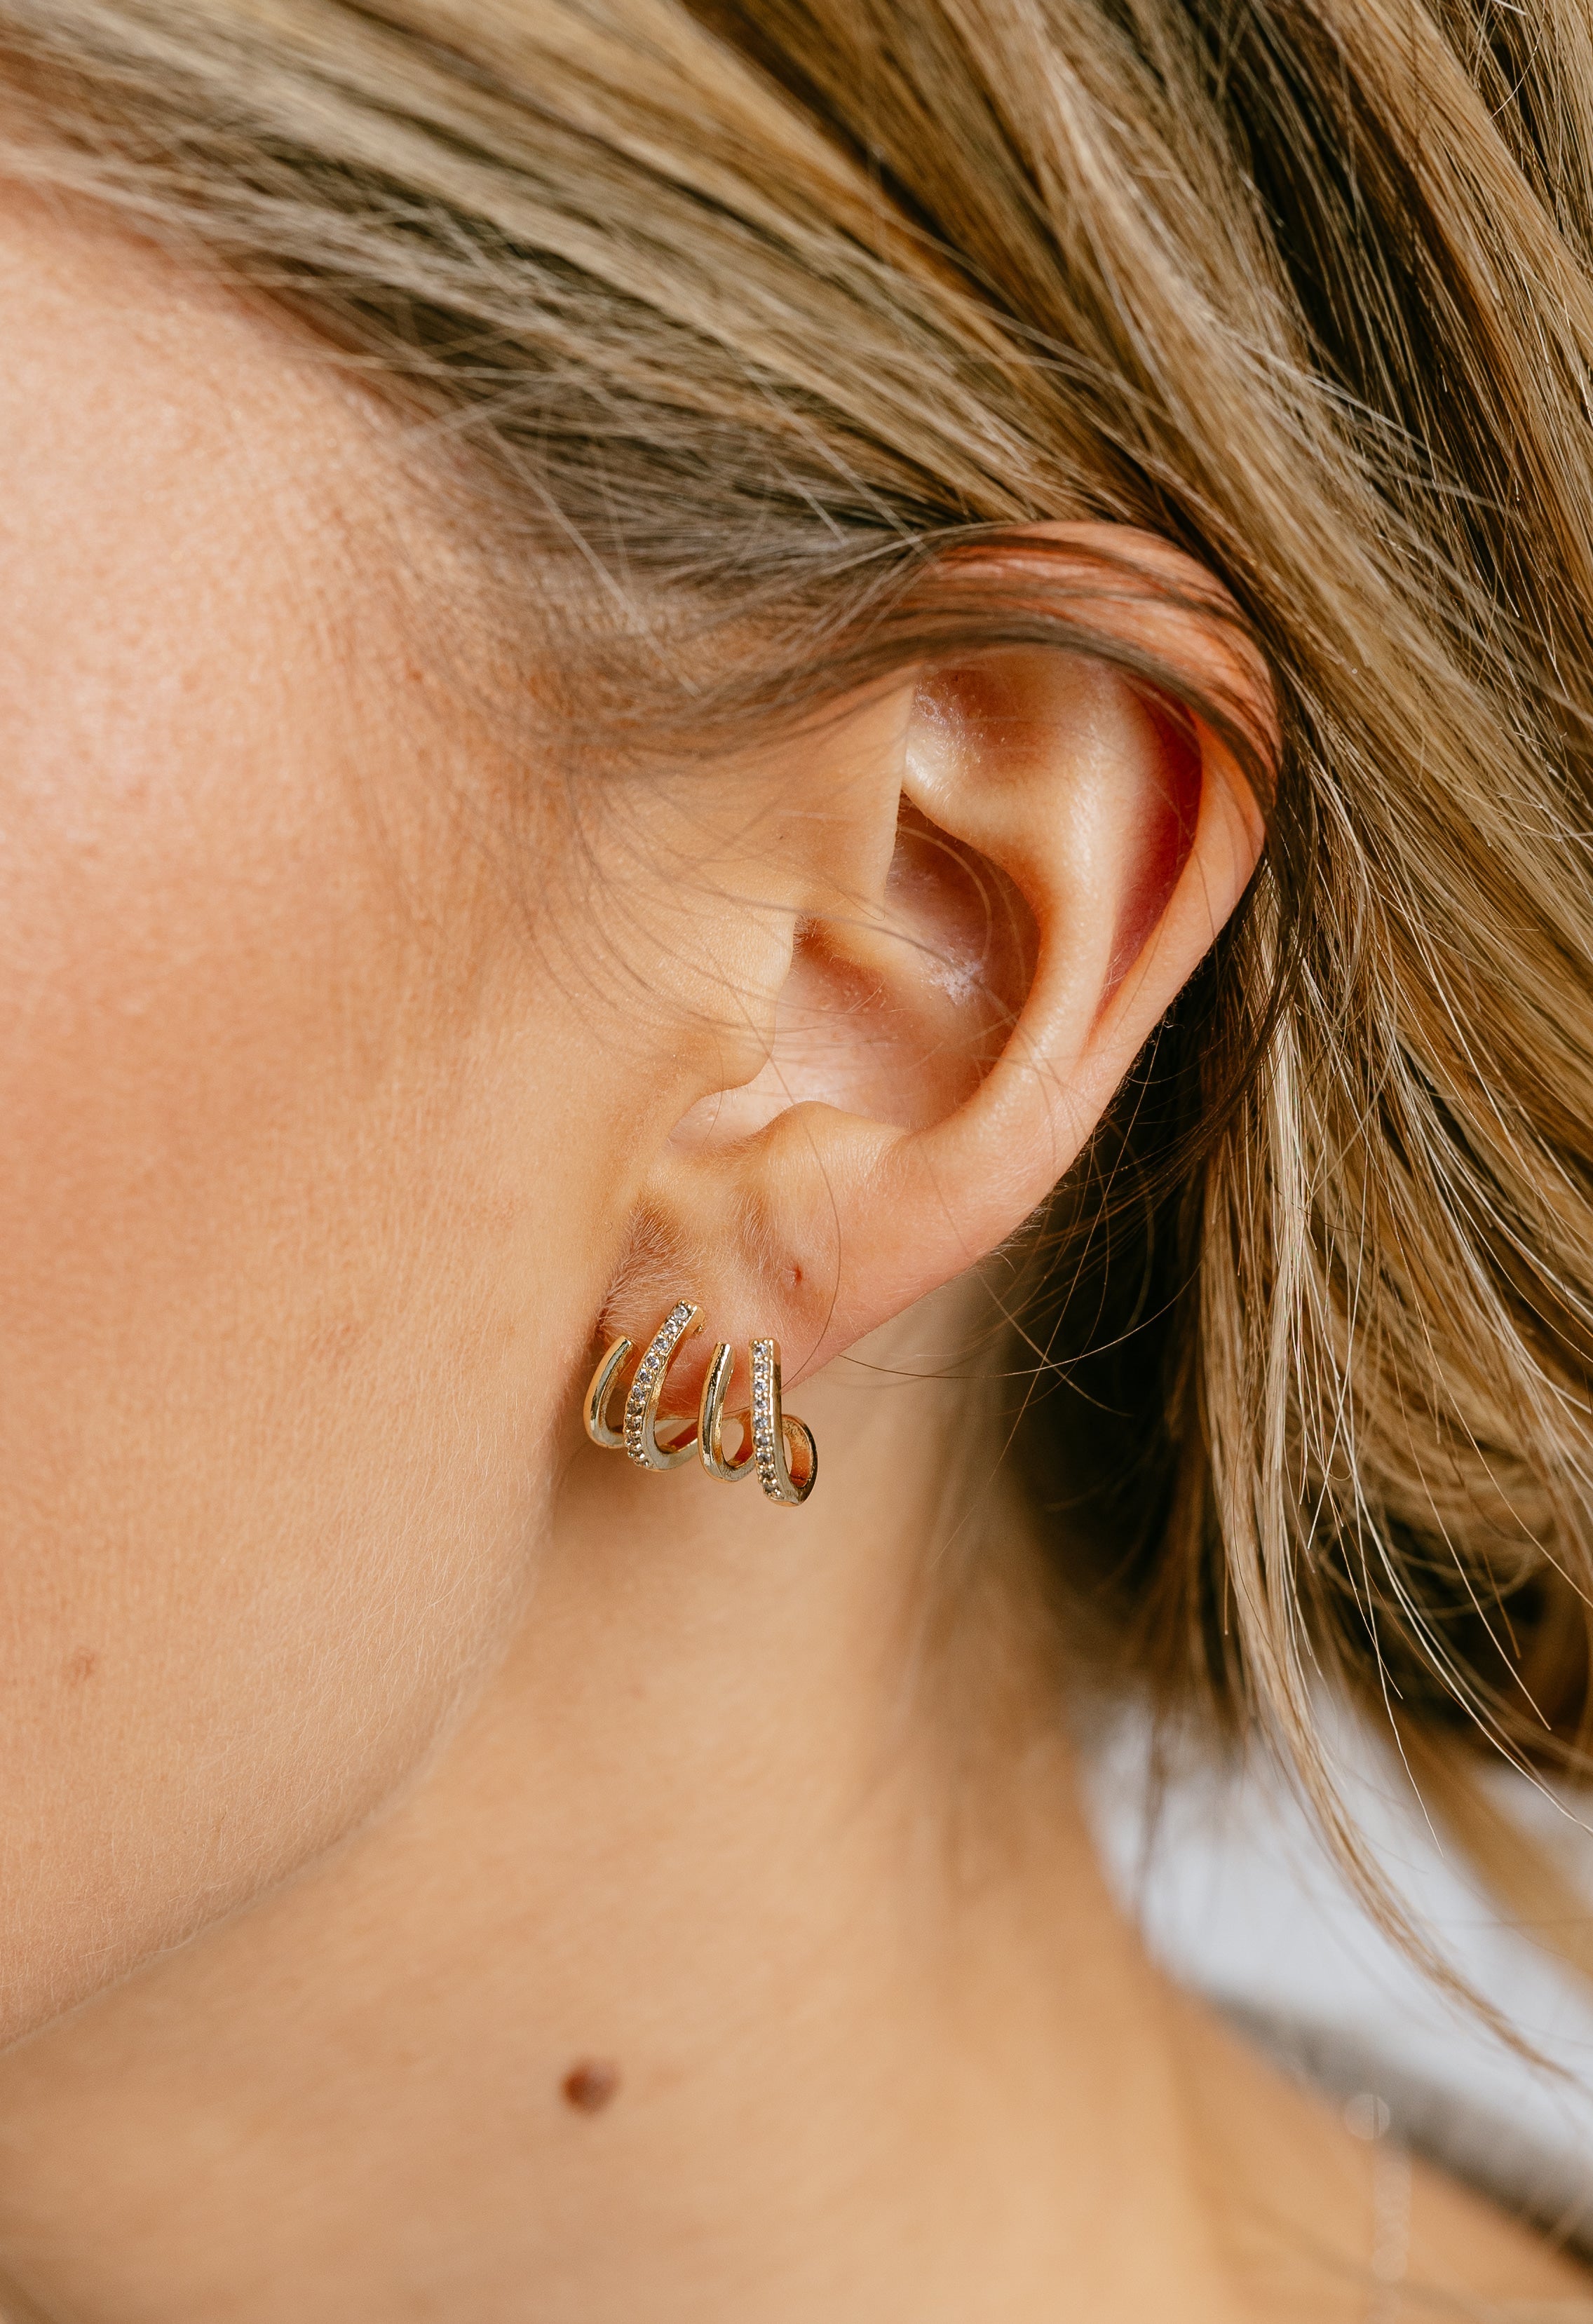 Frostbite Earrings - GOLD - willows clothing Earrings